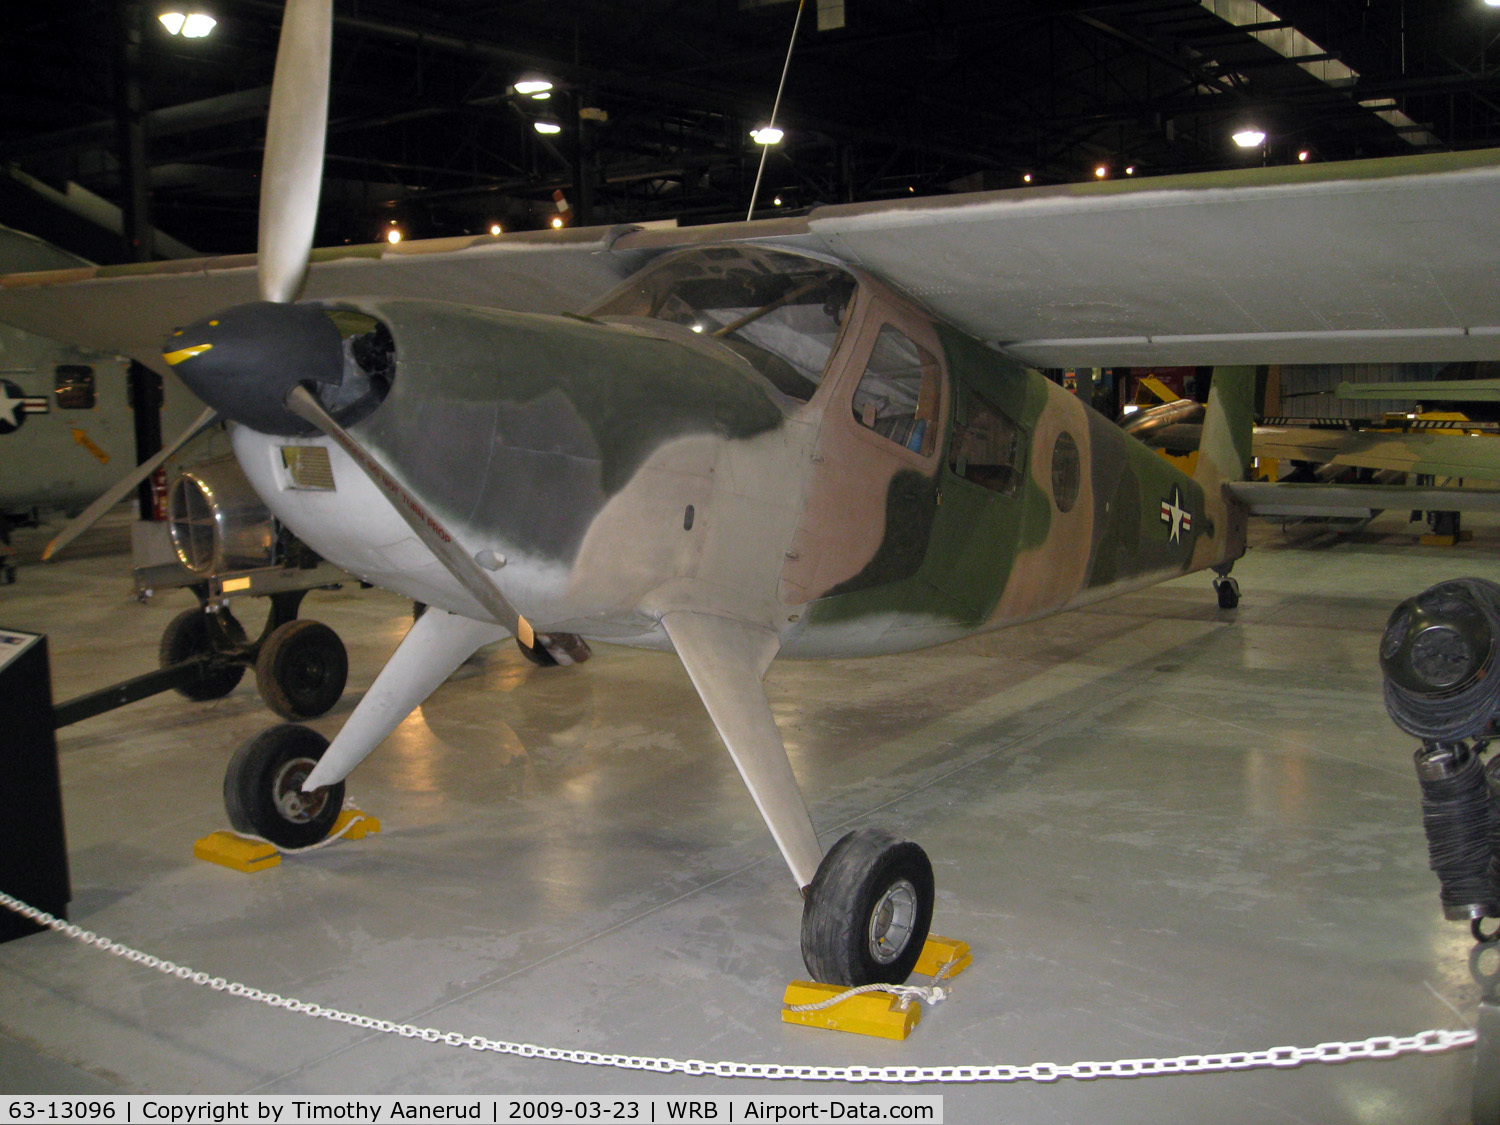 63-13096, 1963 Helio U-10D Super Courier C/N 601, Museum of Aviation, Robins AFB